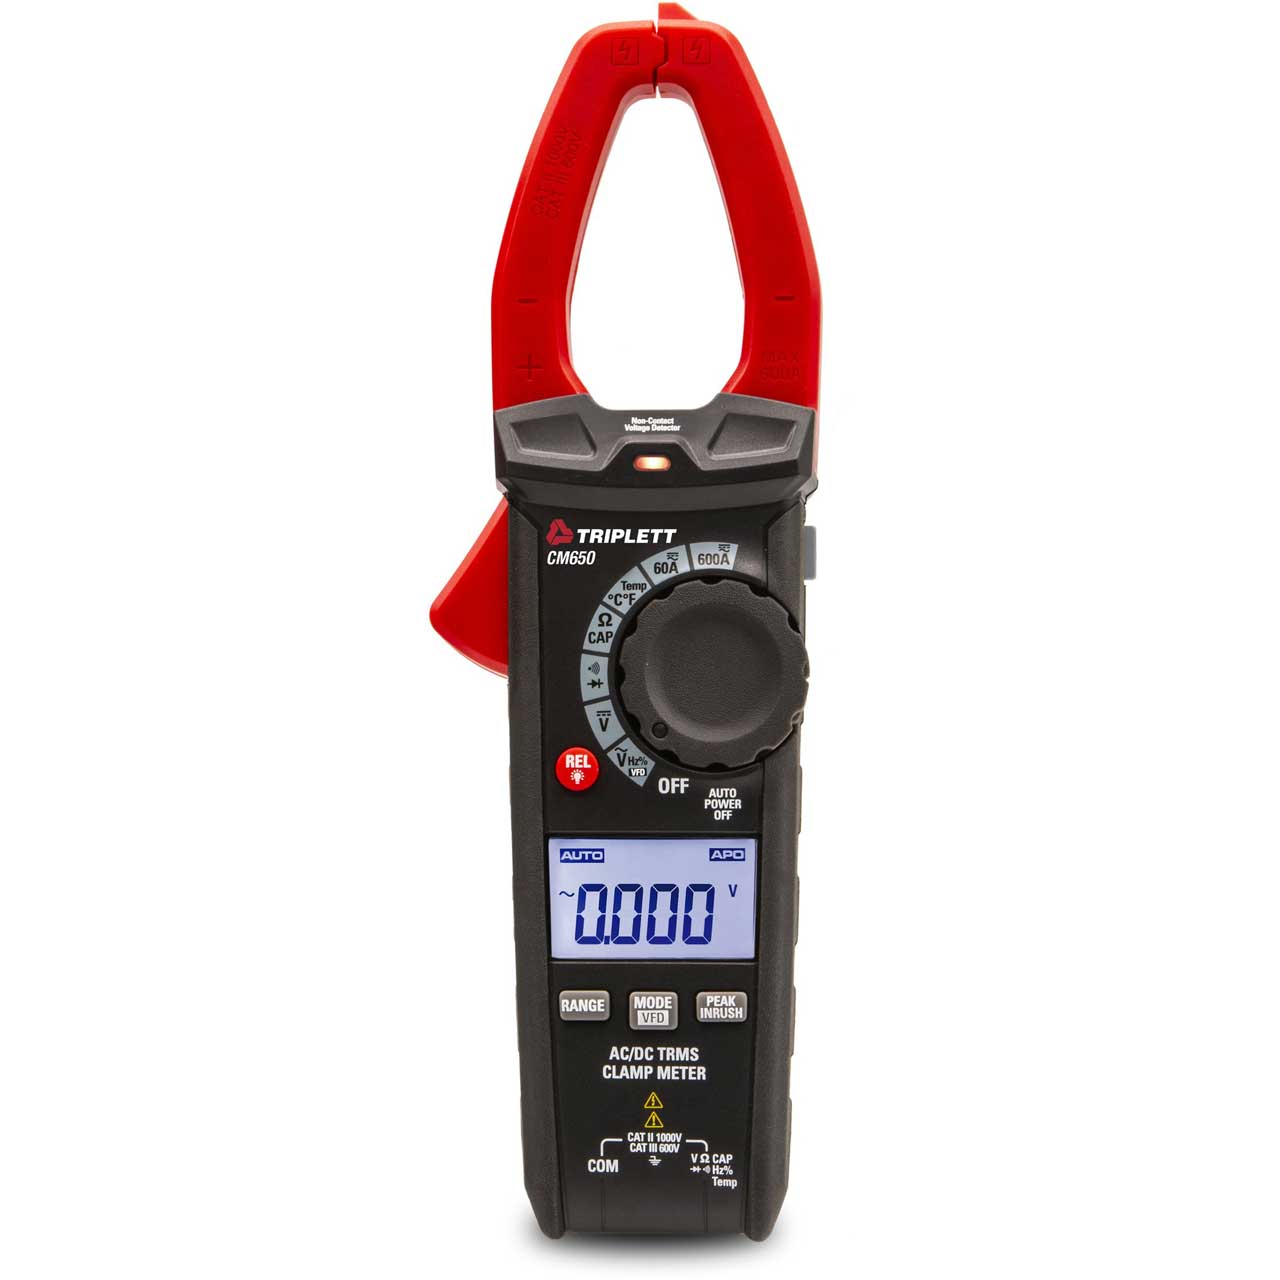 Triplett CM650 600A True RMS AC / DC Clamp Meter with Certificate of Traceability to N.I.S.T. TRIPL-CM650-NIST